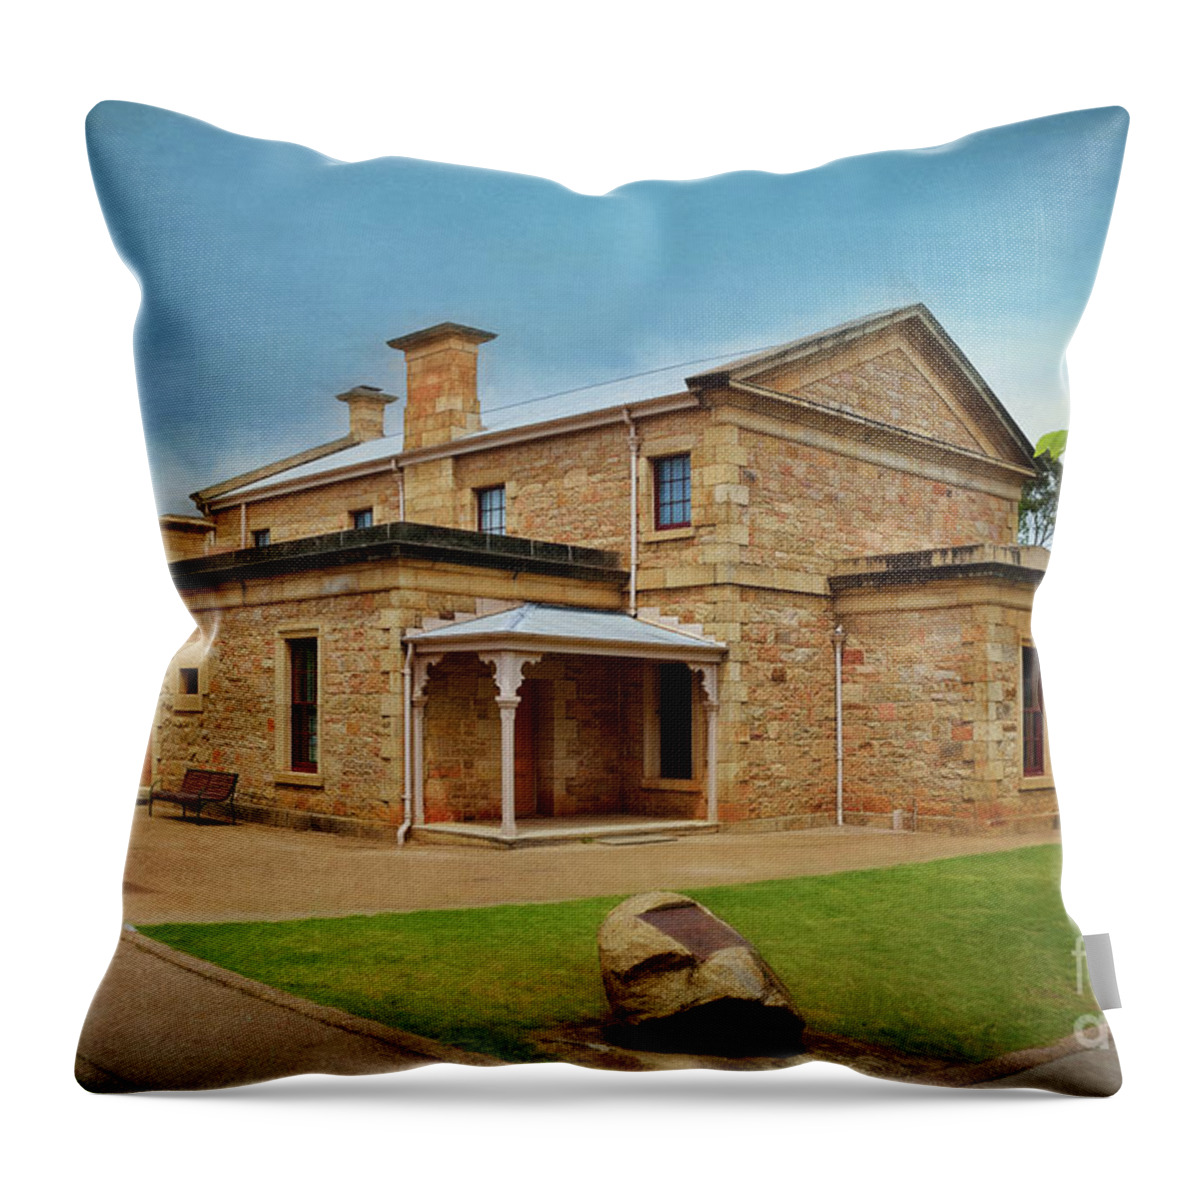 Beechworth Throw Pillow featuring the photograph Beechworth Courthouse by Stuart Row